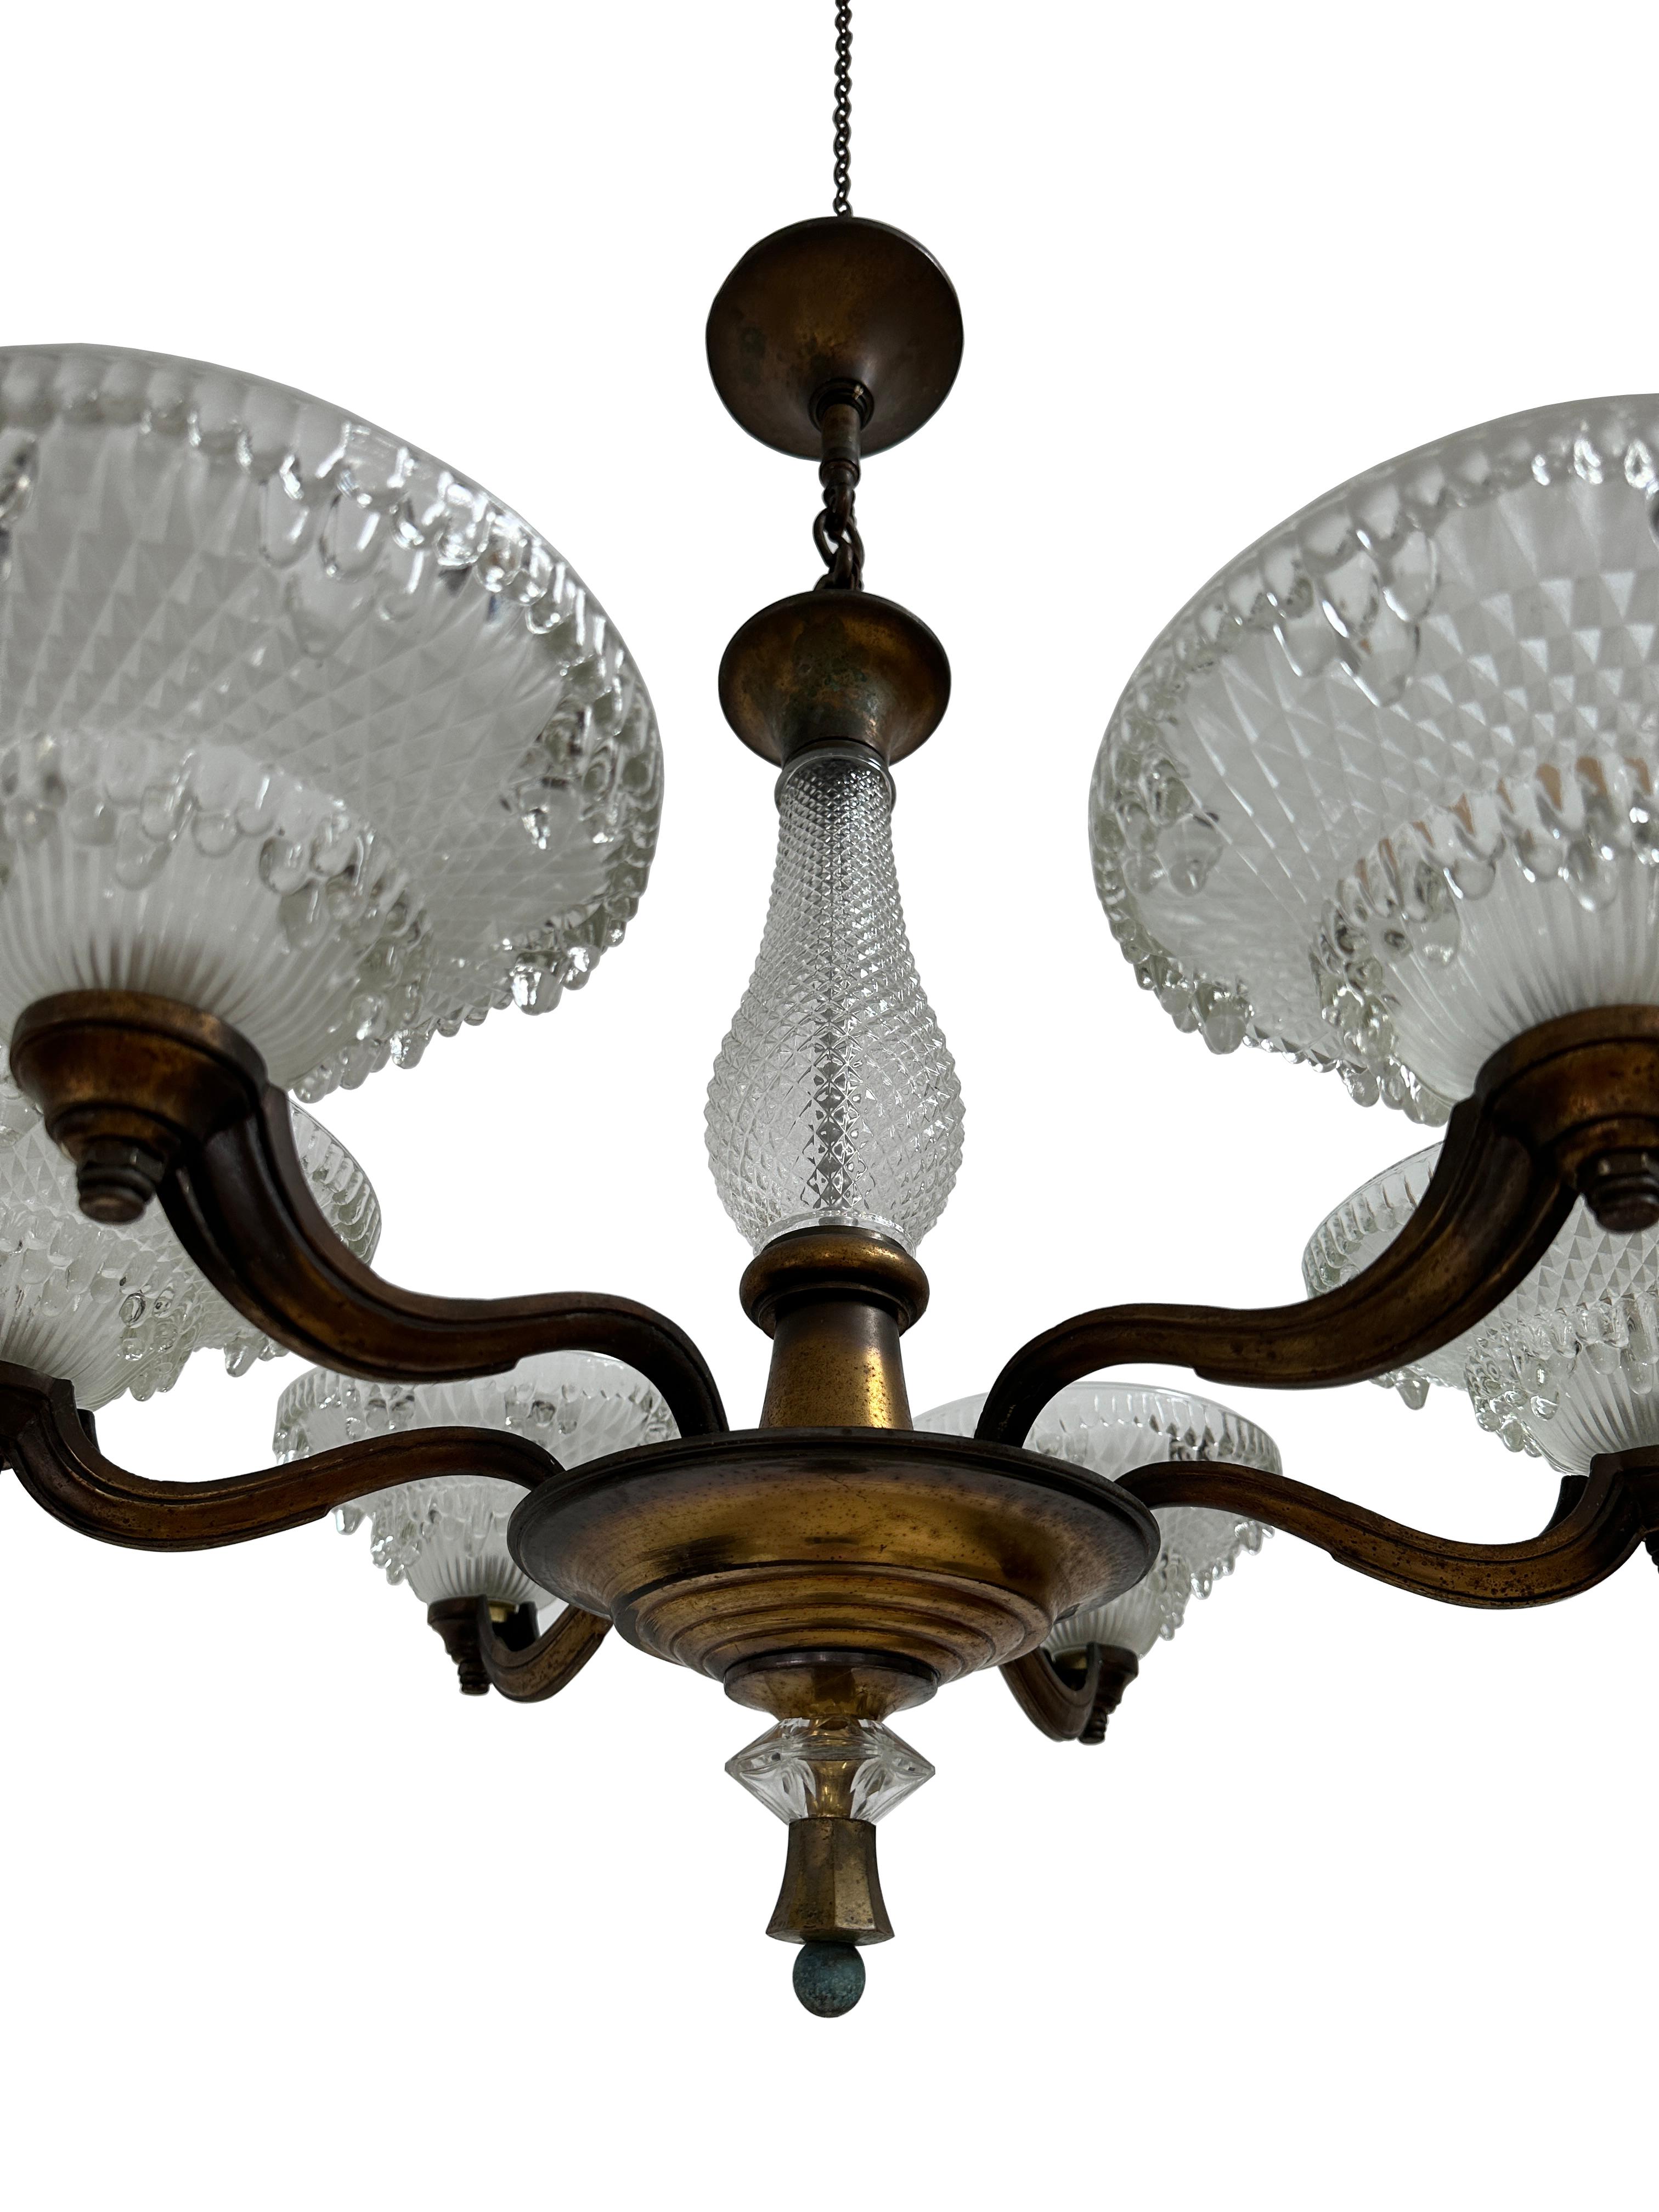 Antique French Art Deco Glass Ceiling Pendant Chandelier Light By Petitot & Ezan In Good Condition For Sale In Sale, GB